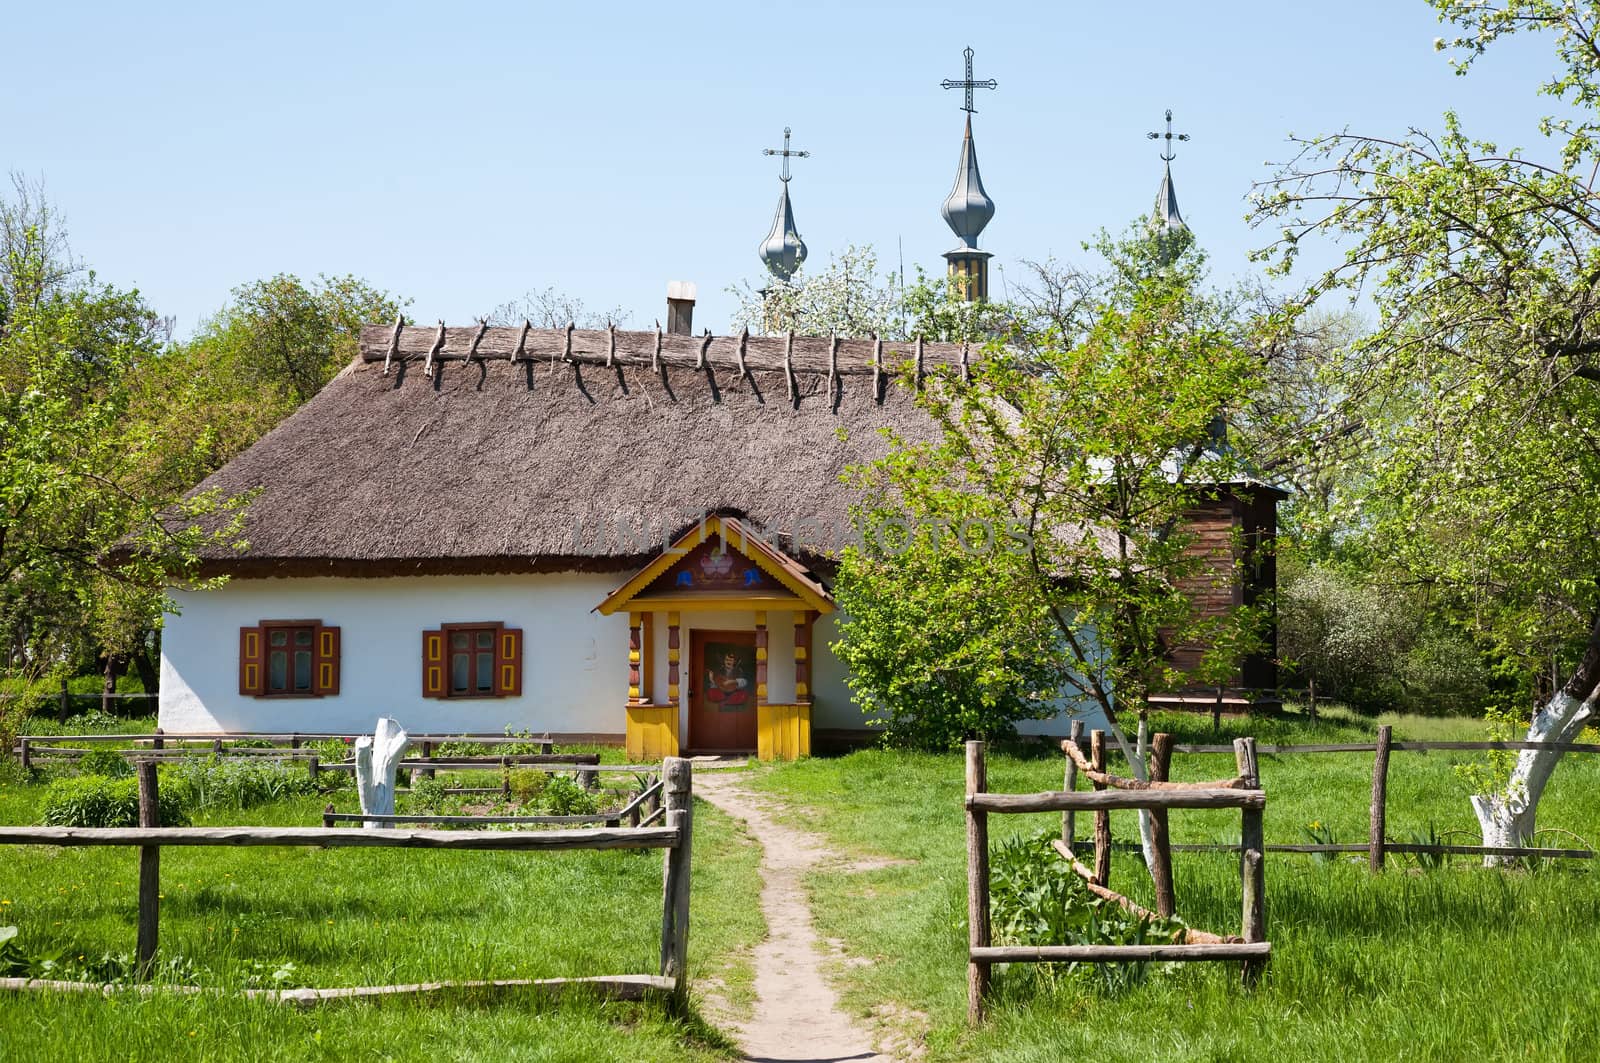 Ukrainian traditional hut with fence